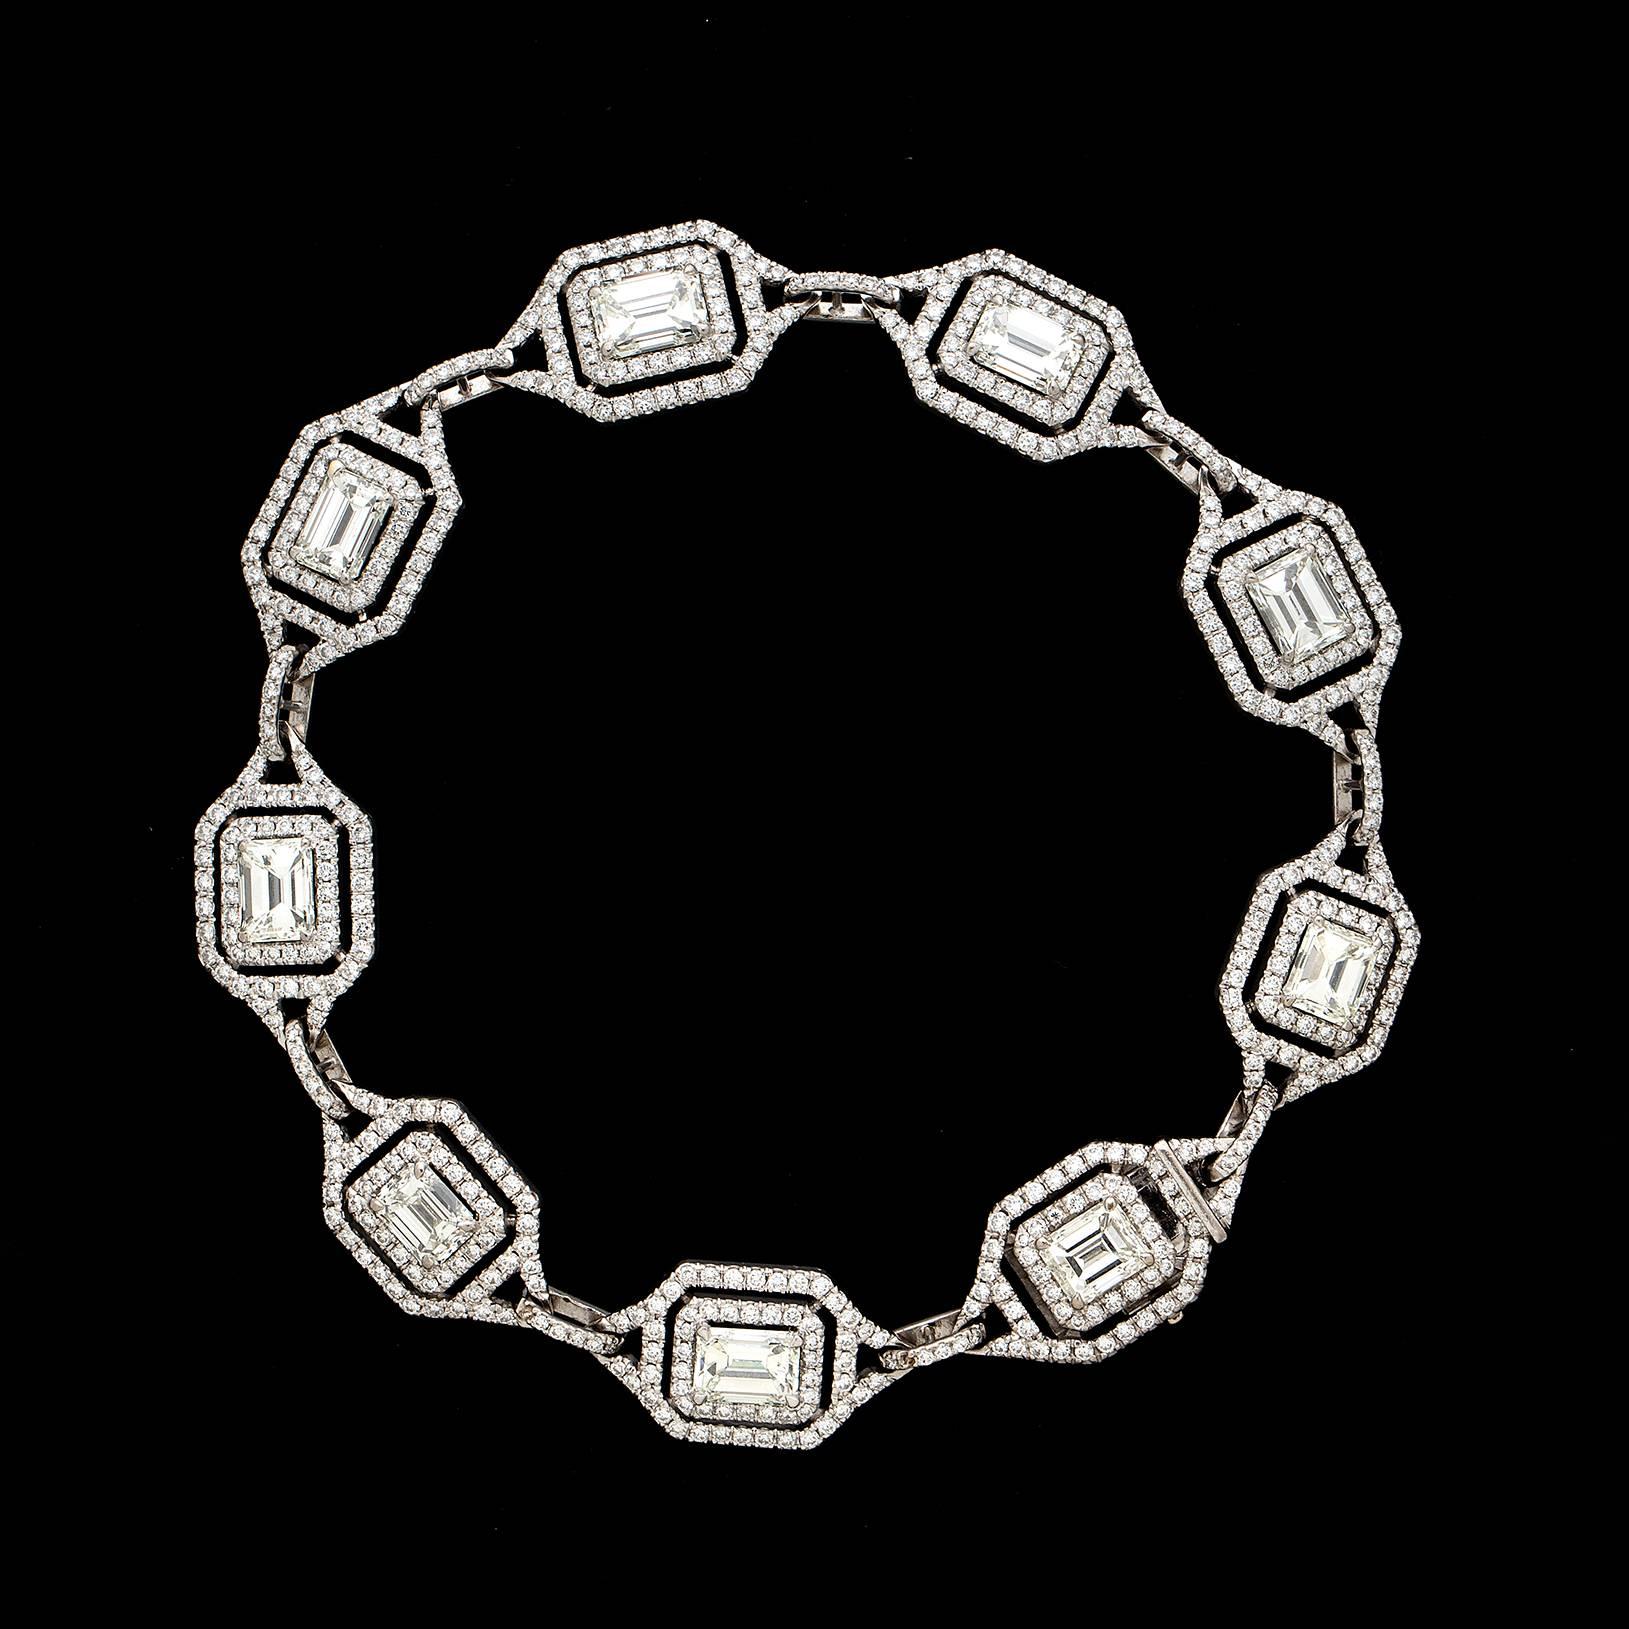 This elegant 18 karat white gold bracelet features 9 beautiful emerald cut diamonds weighing approximately 9.0 carats. These impressive clean and white stones are set among 600 round brilliant cut melee diamonds weighing approximately 3.0 carats.